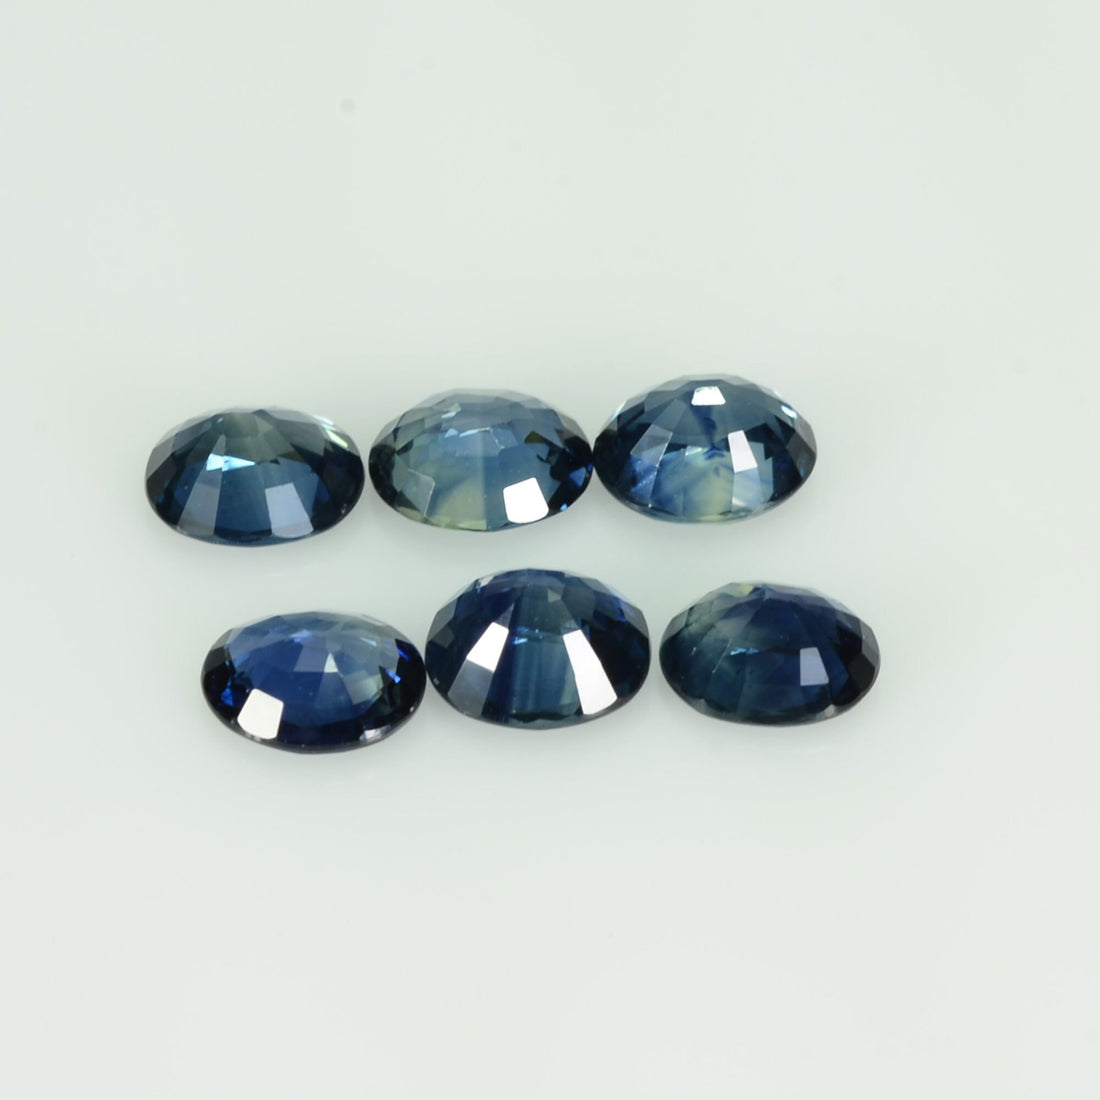 6x5 Natural Calibrated Blue Sapphire Loose Gemstone Oval Cut